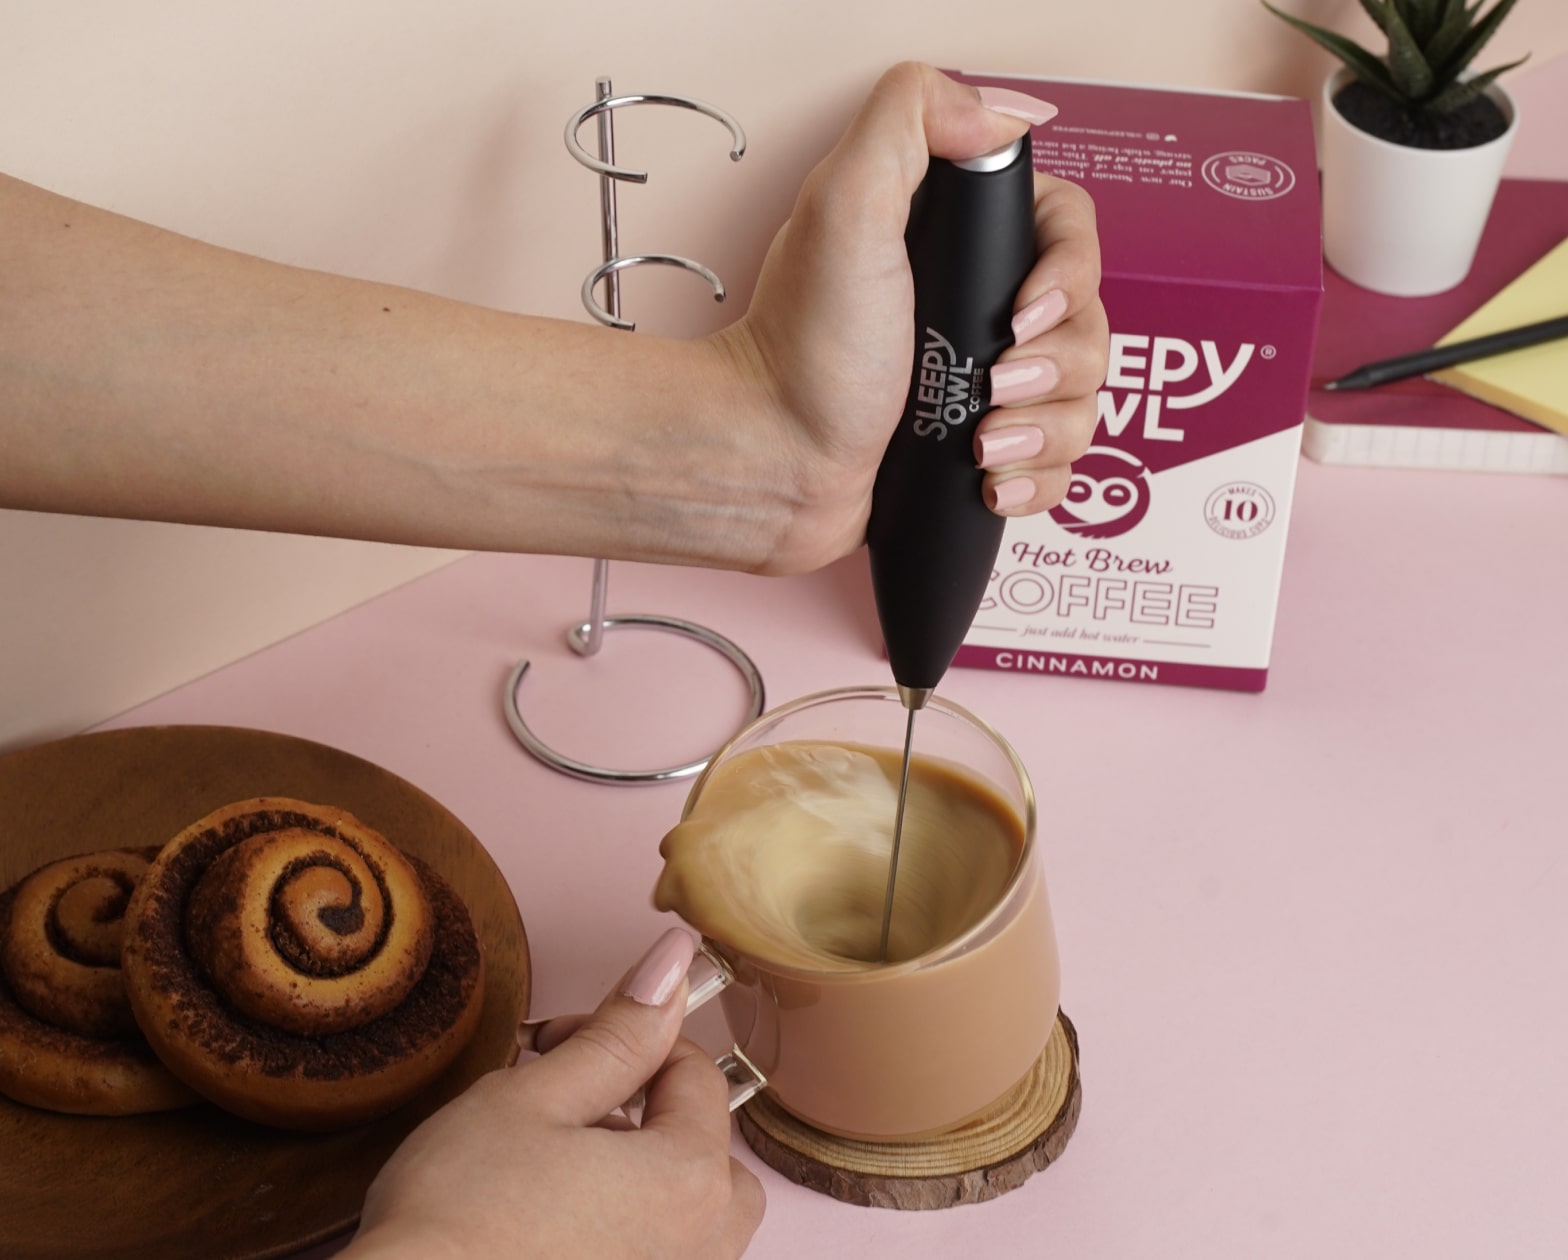 The Top 5 Reasons to Use a Coffee Frother – Sleepy Owl Coffee